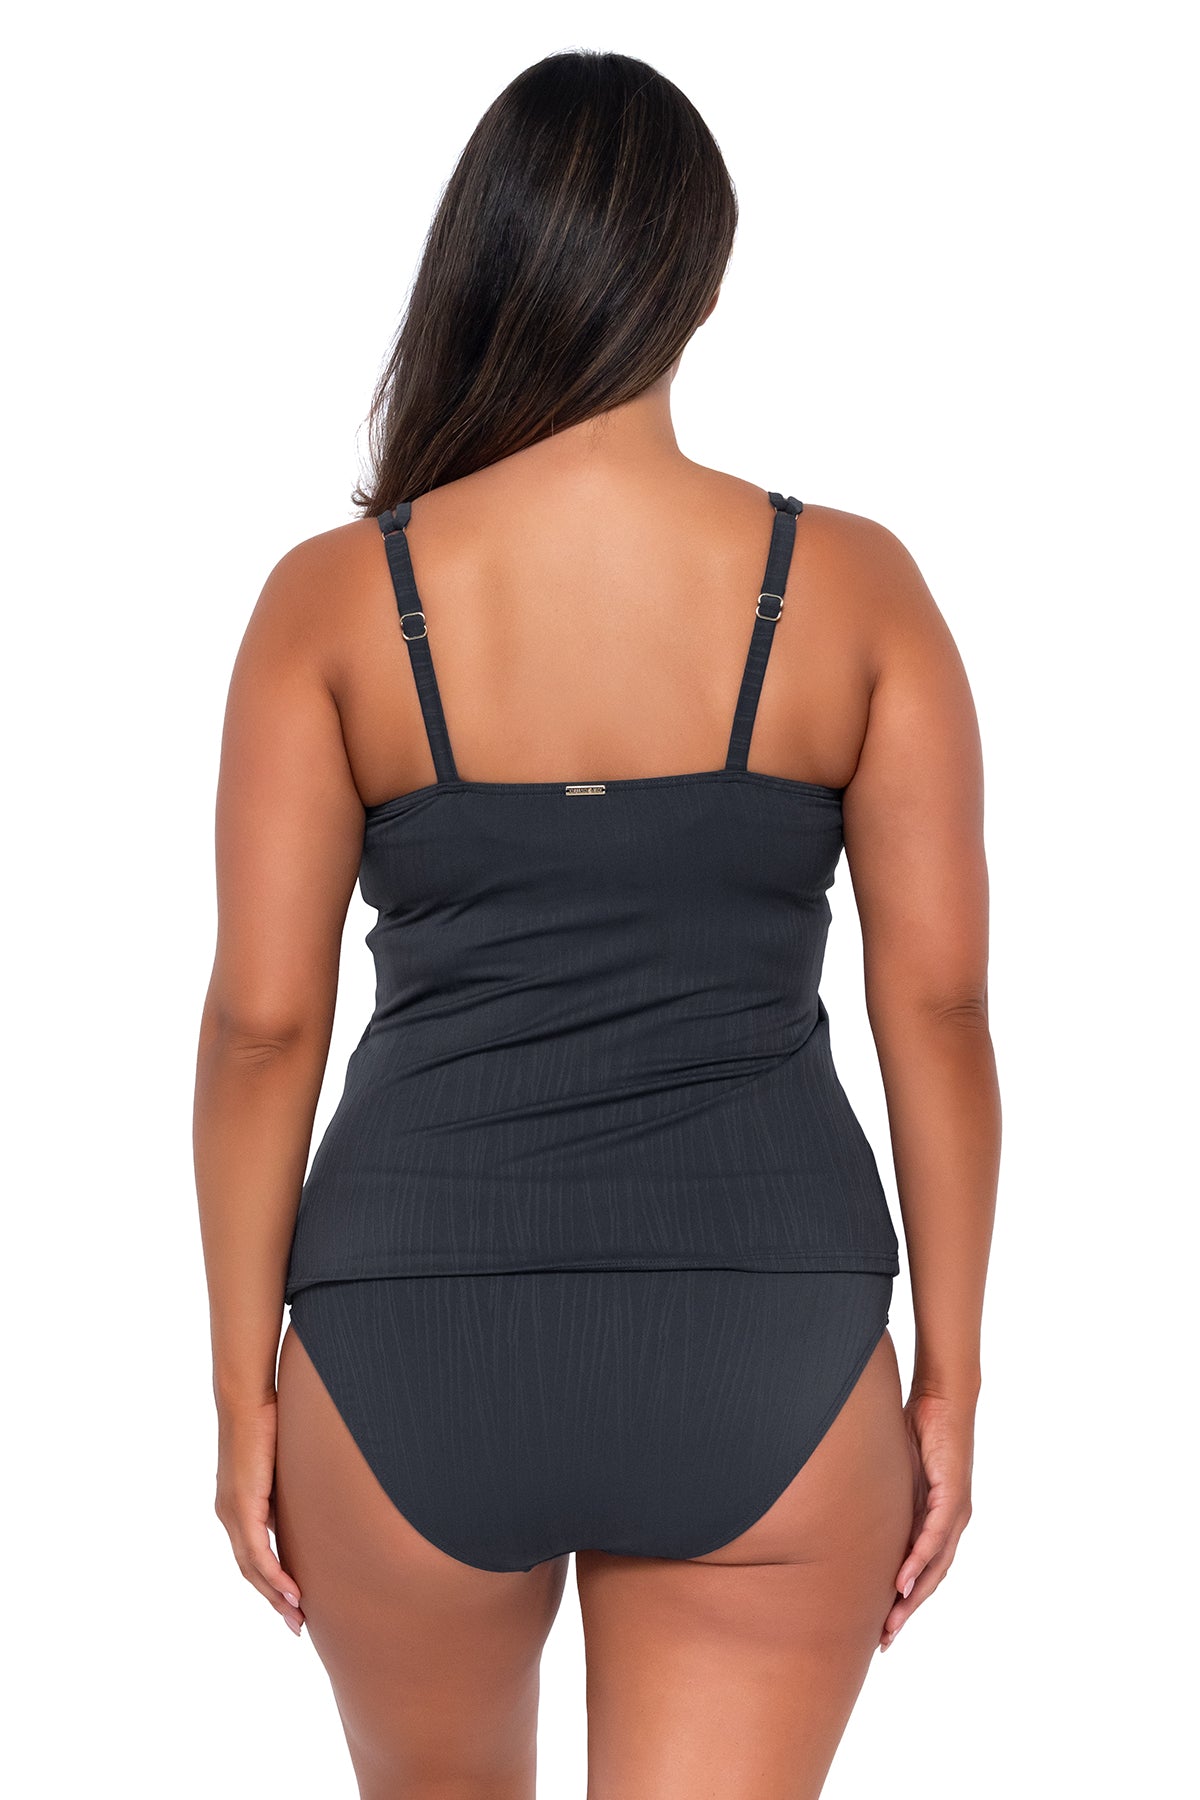 Slate Seagrass Texture Simone Tankini: Slim-Fit, Cup-Sized Top